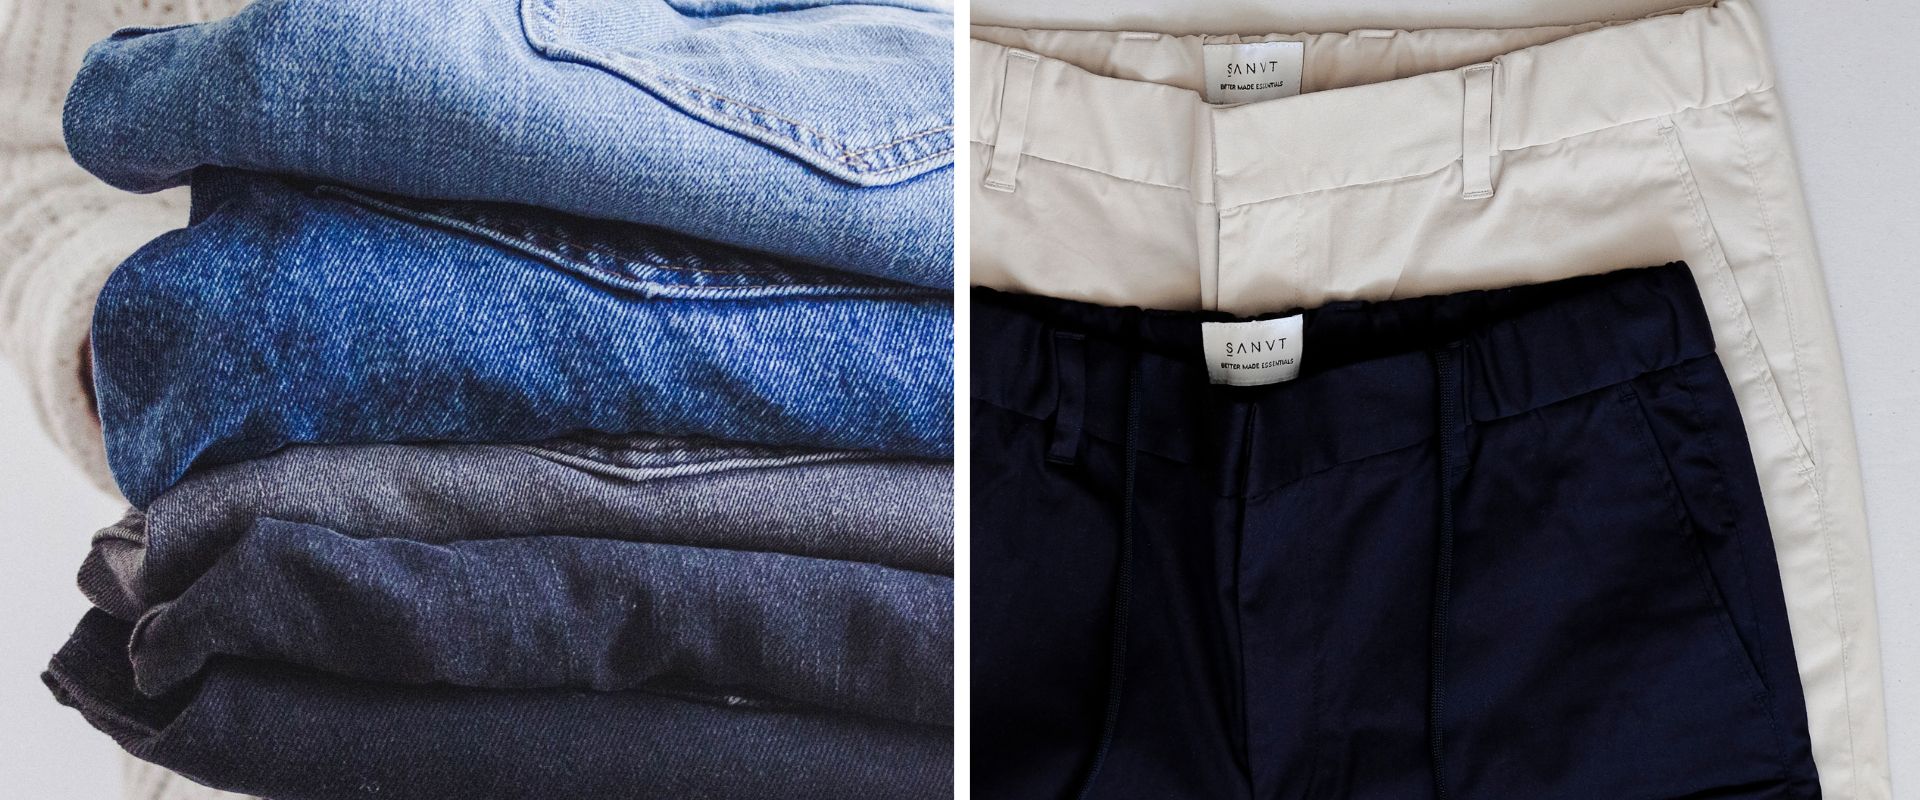 What's the Difference Between Pants and Jeans? Jeans vs. Pants 